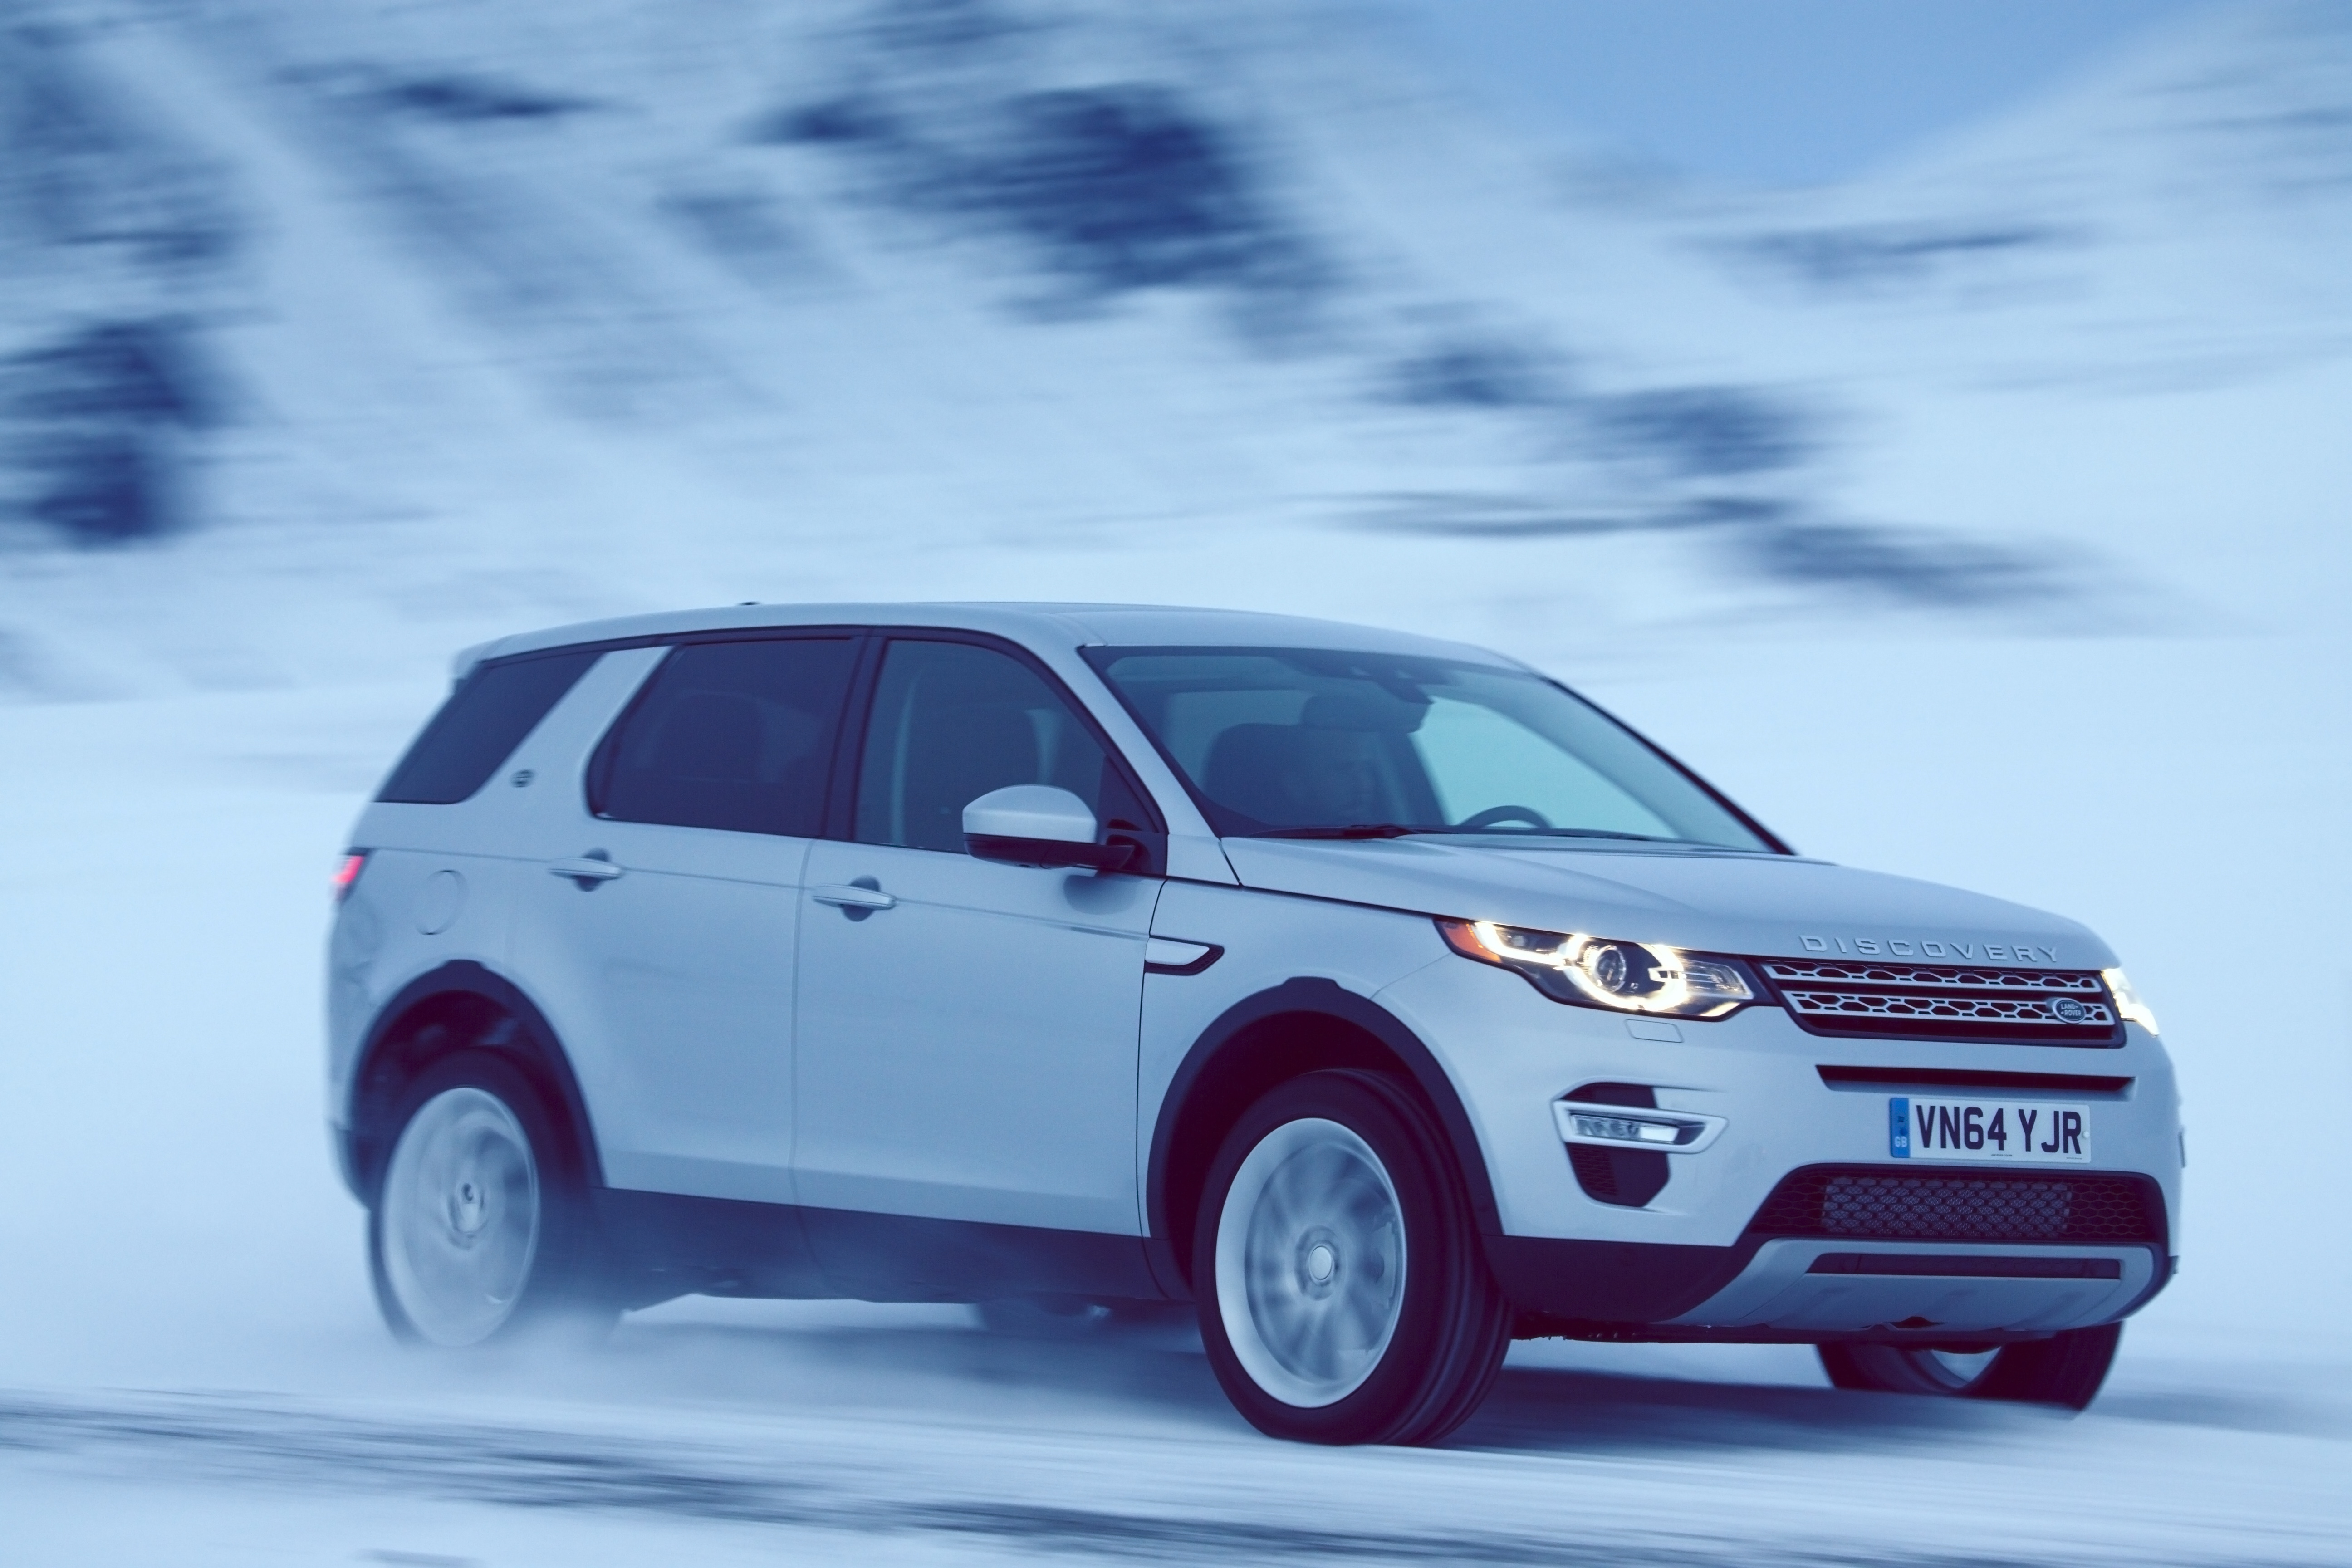 Driving the new Discovery Sport in Iceland